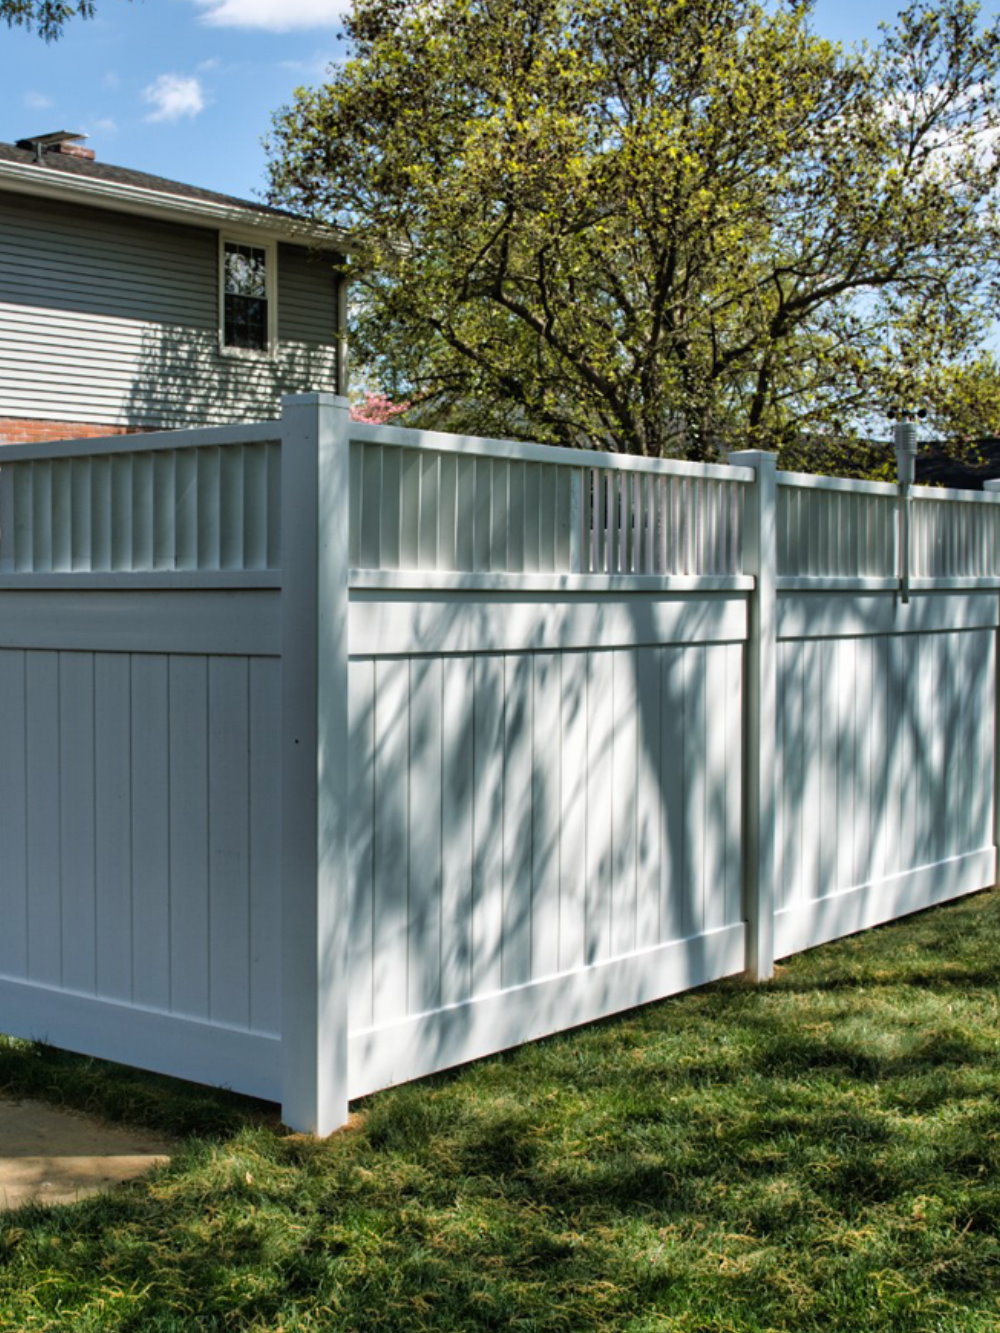 Types of fences we install in Uniontown KY